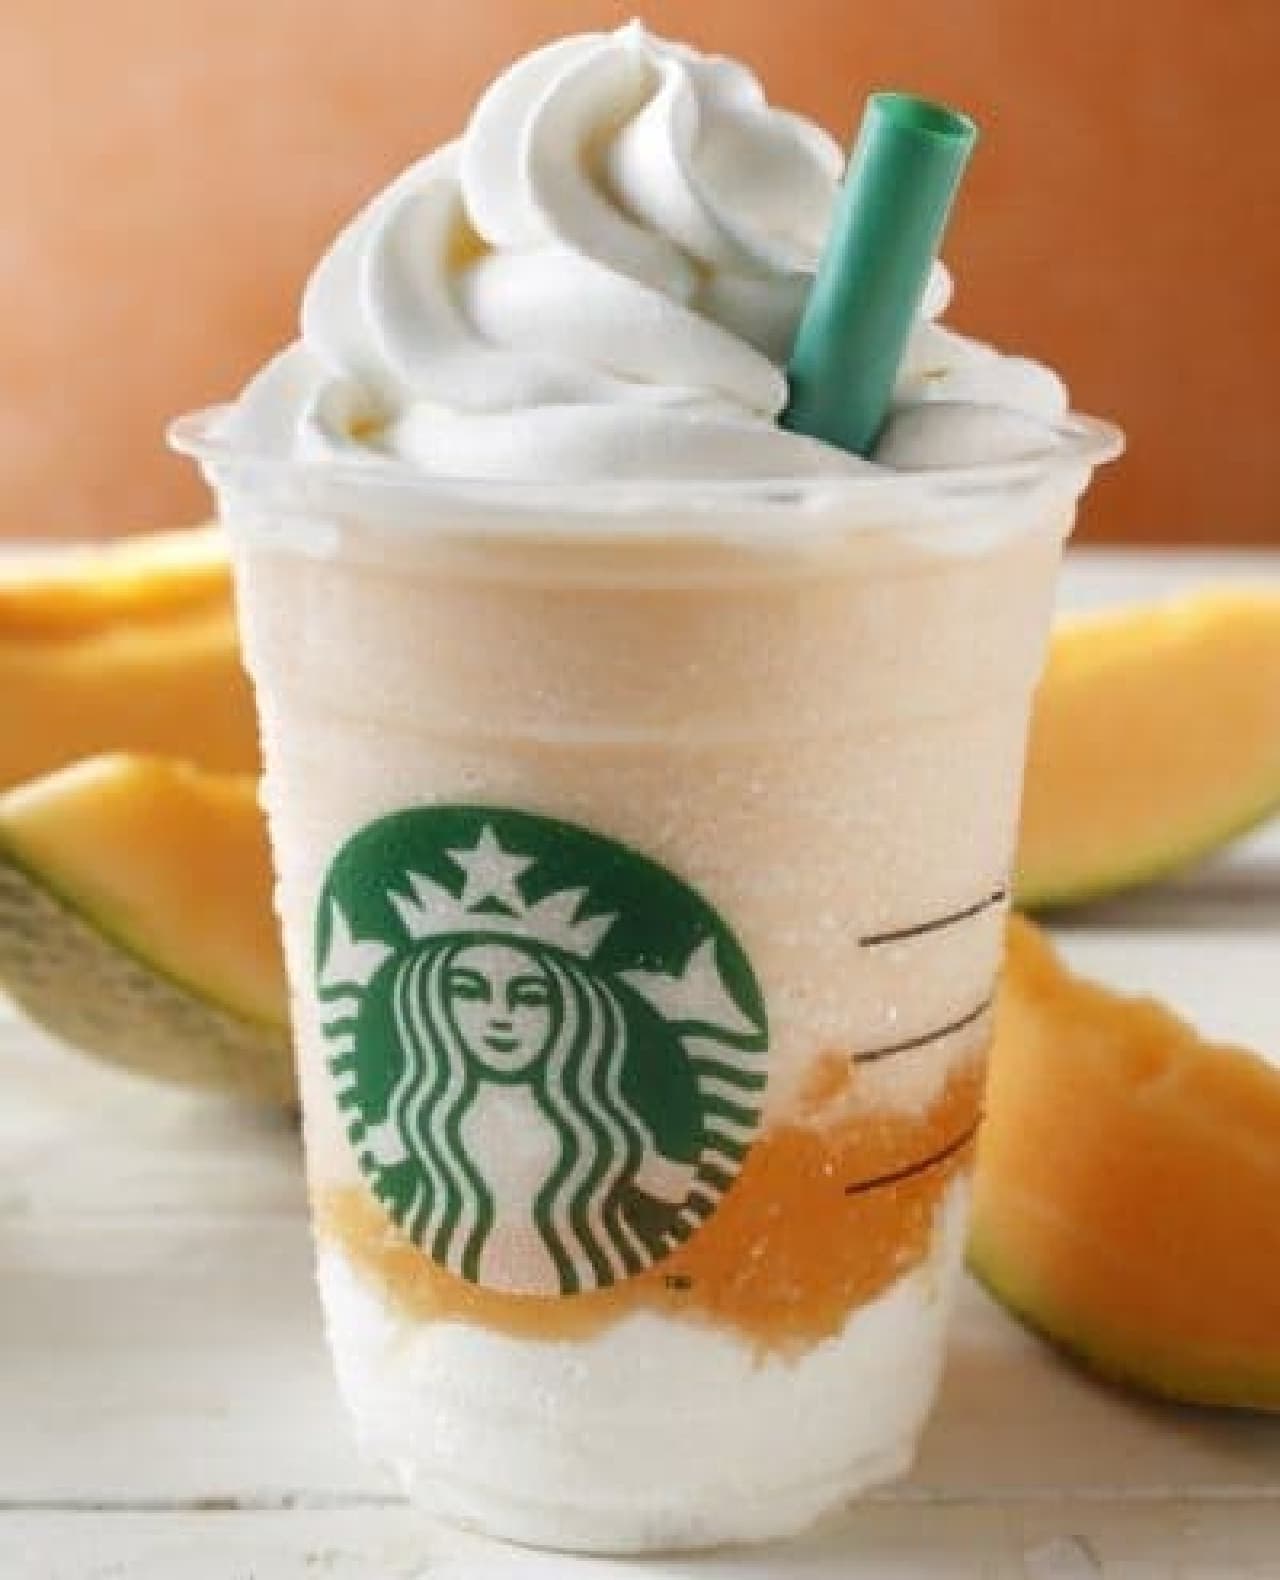 The latest work "Cantaloupe Melon & Cream Frappuccino" at the time of article creation (April 2016)